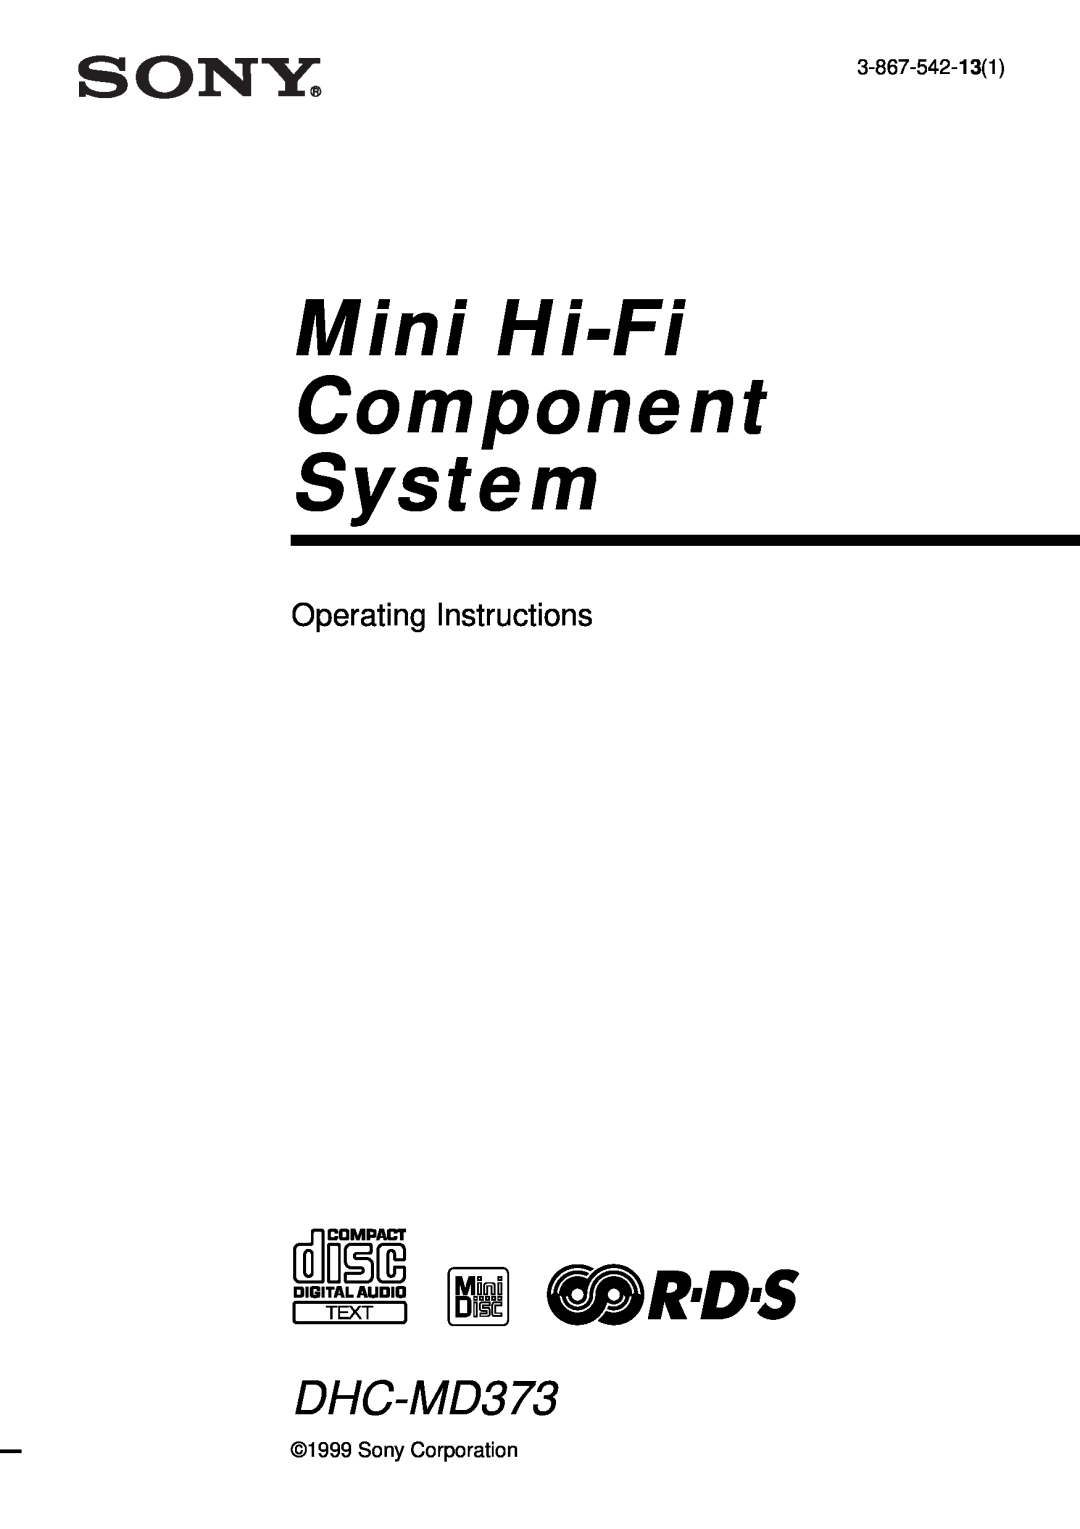 Sony DHC-MD373 manual Operating Instructions, 3-867-542-131, Sony Corporation, Mini Hi-Fi Component System 